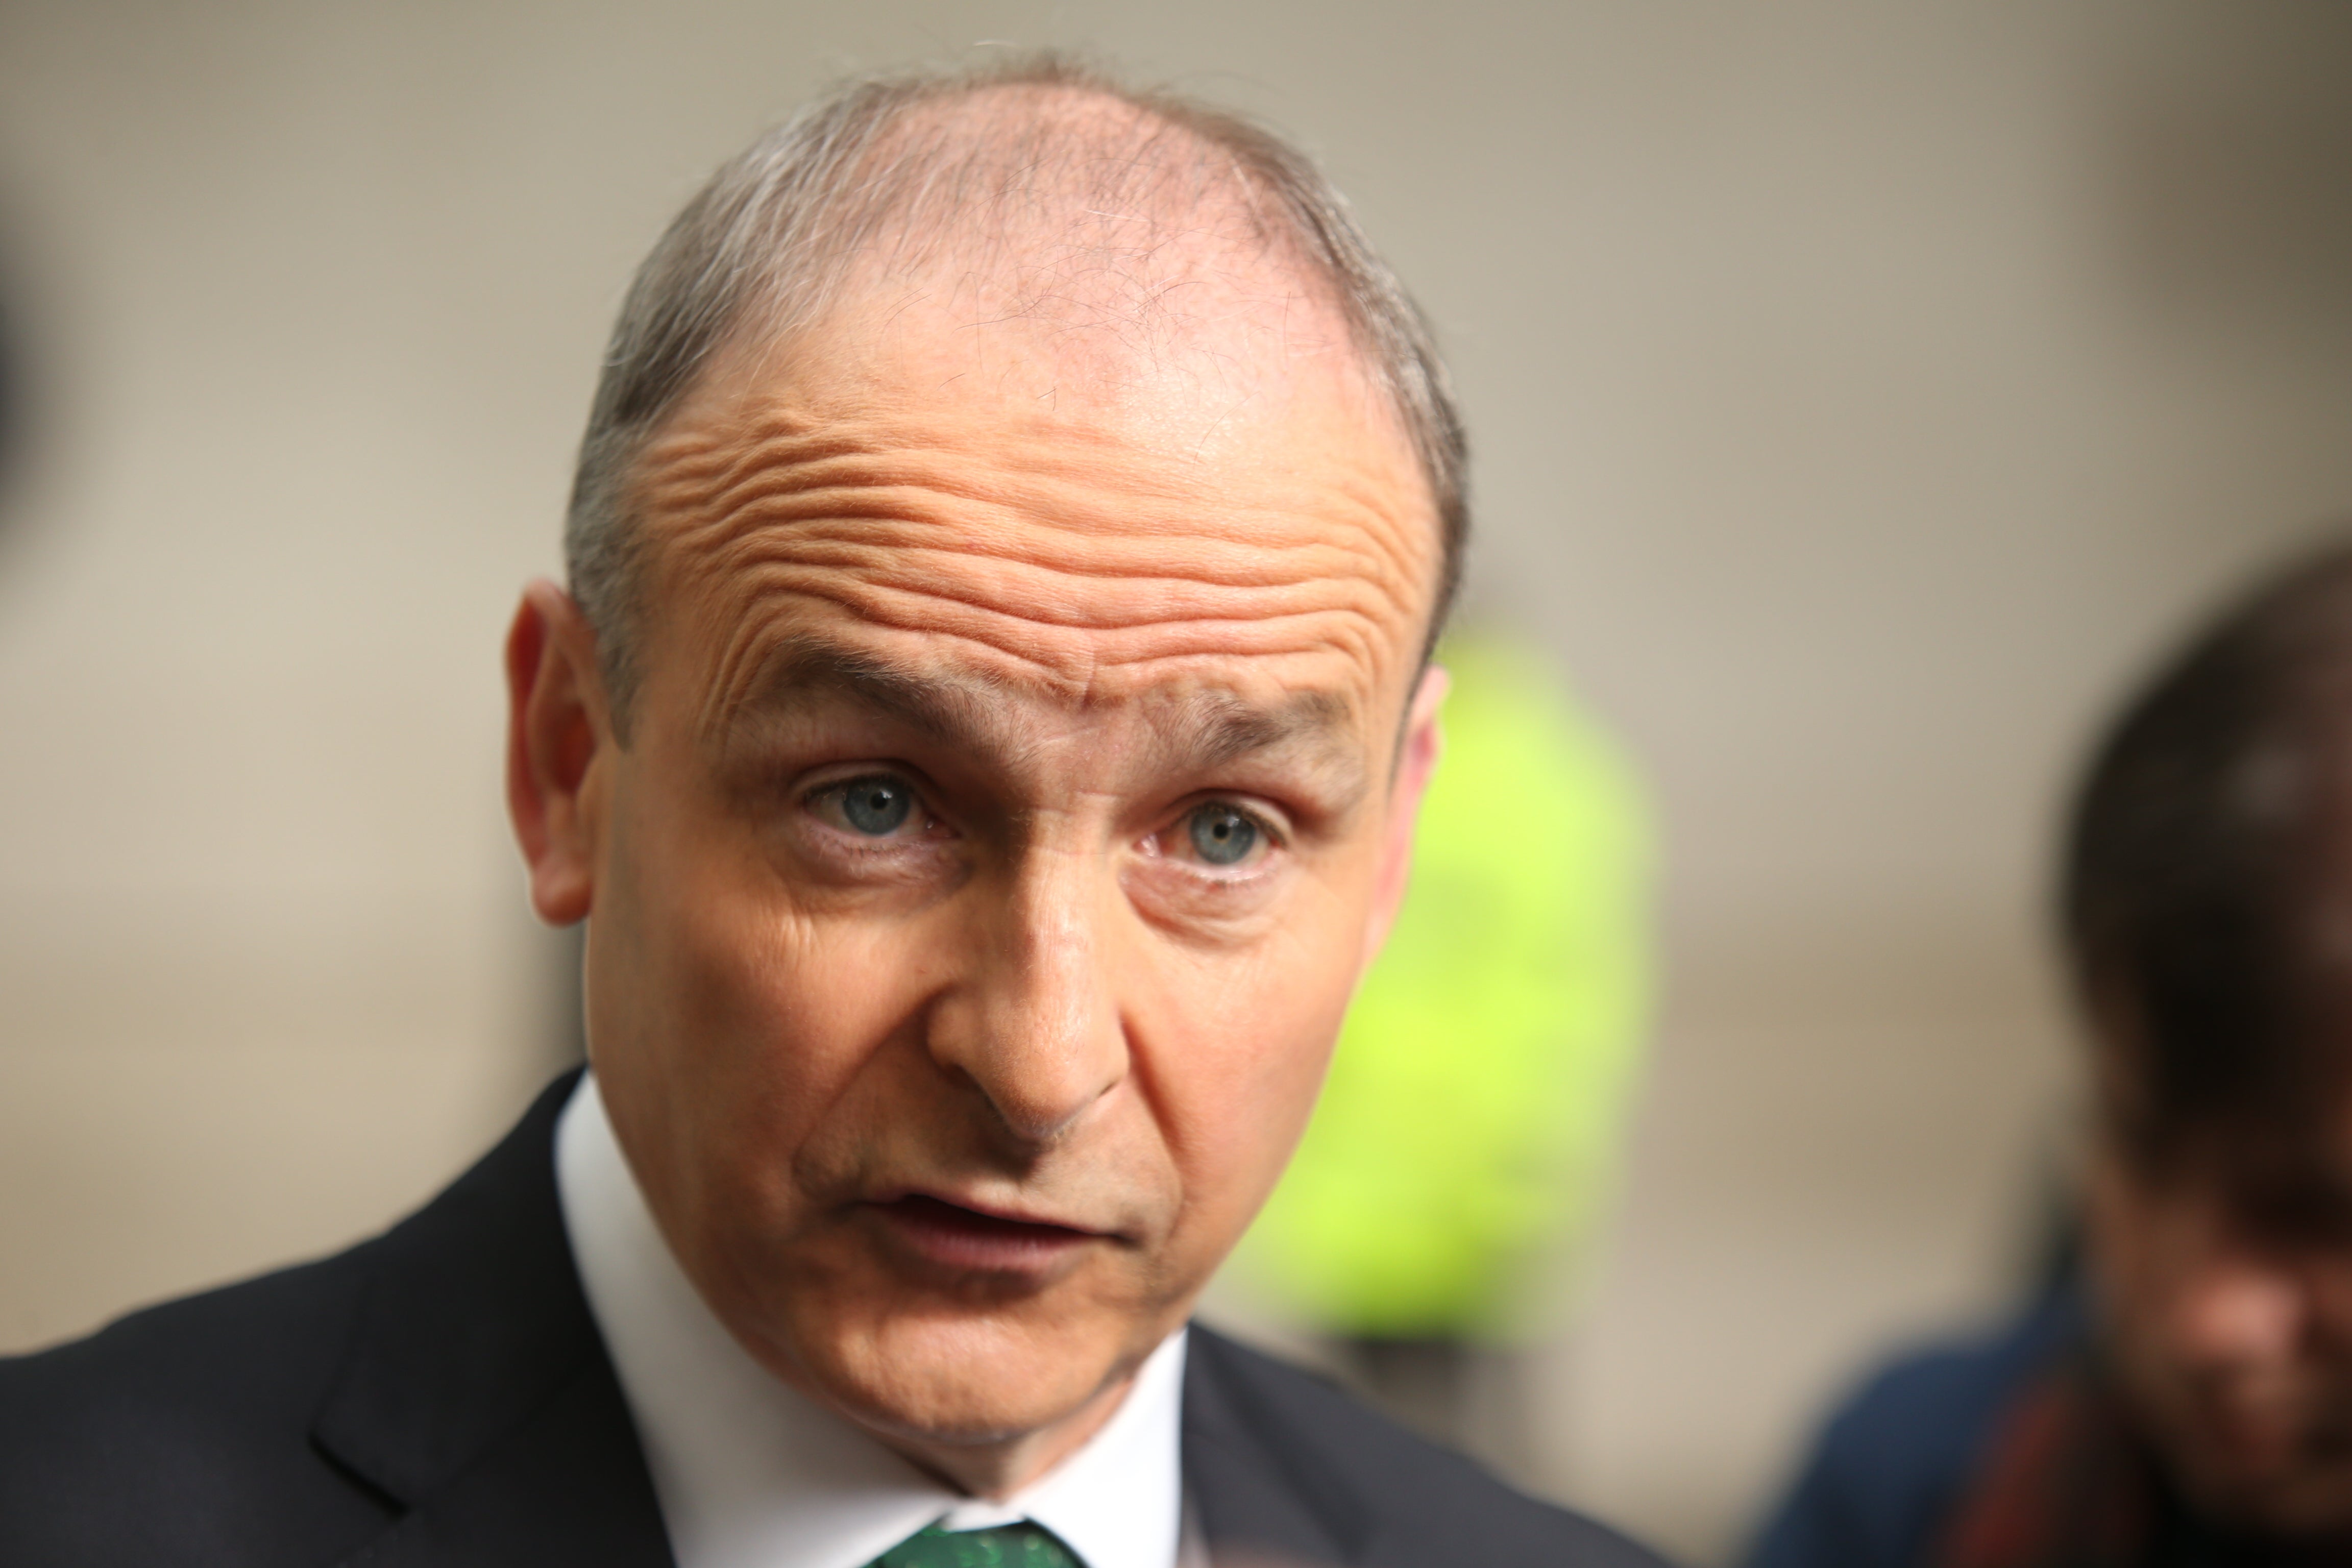 Taoiseach Micheal Martin urged Northern Irish politicians to work together following the Assembly election (James Manning/PA)